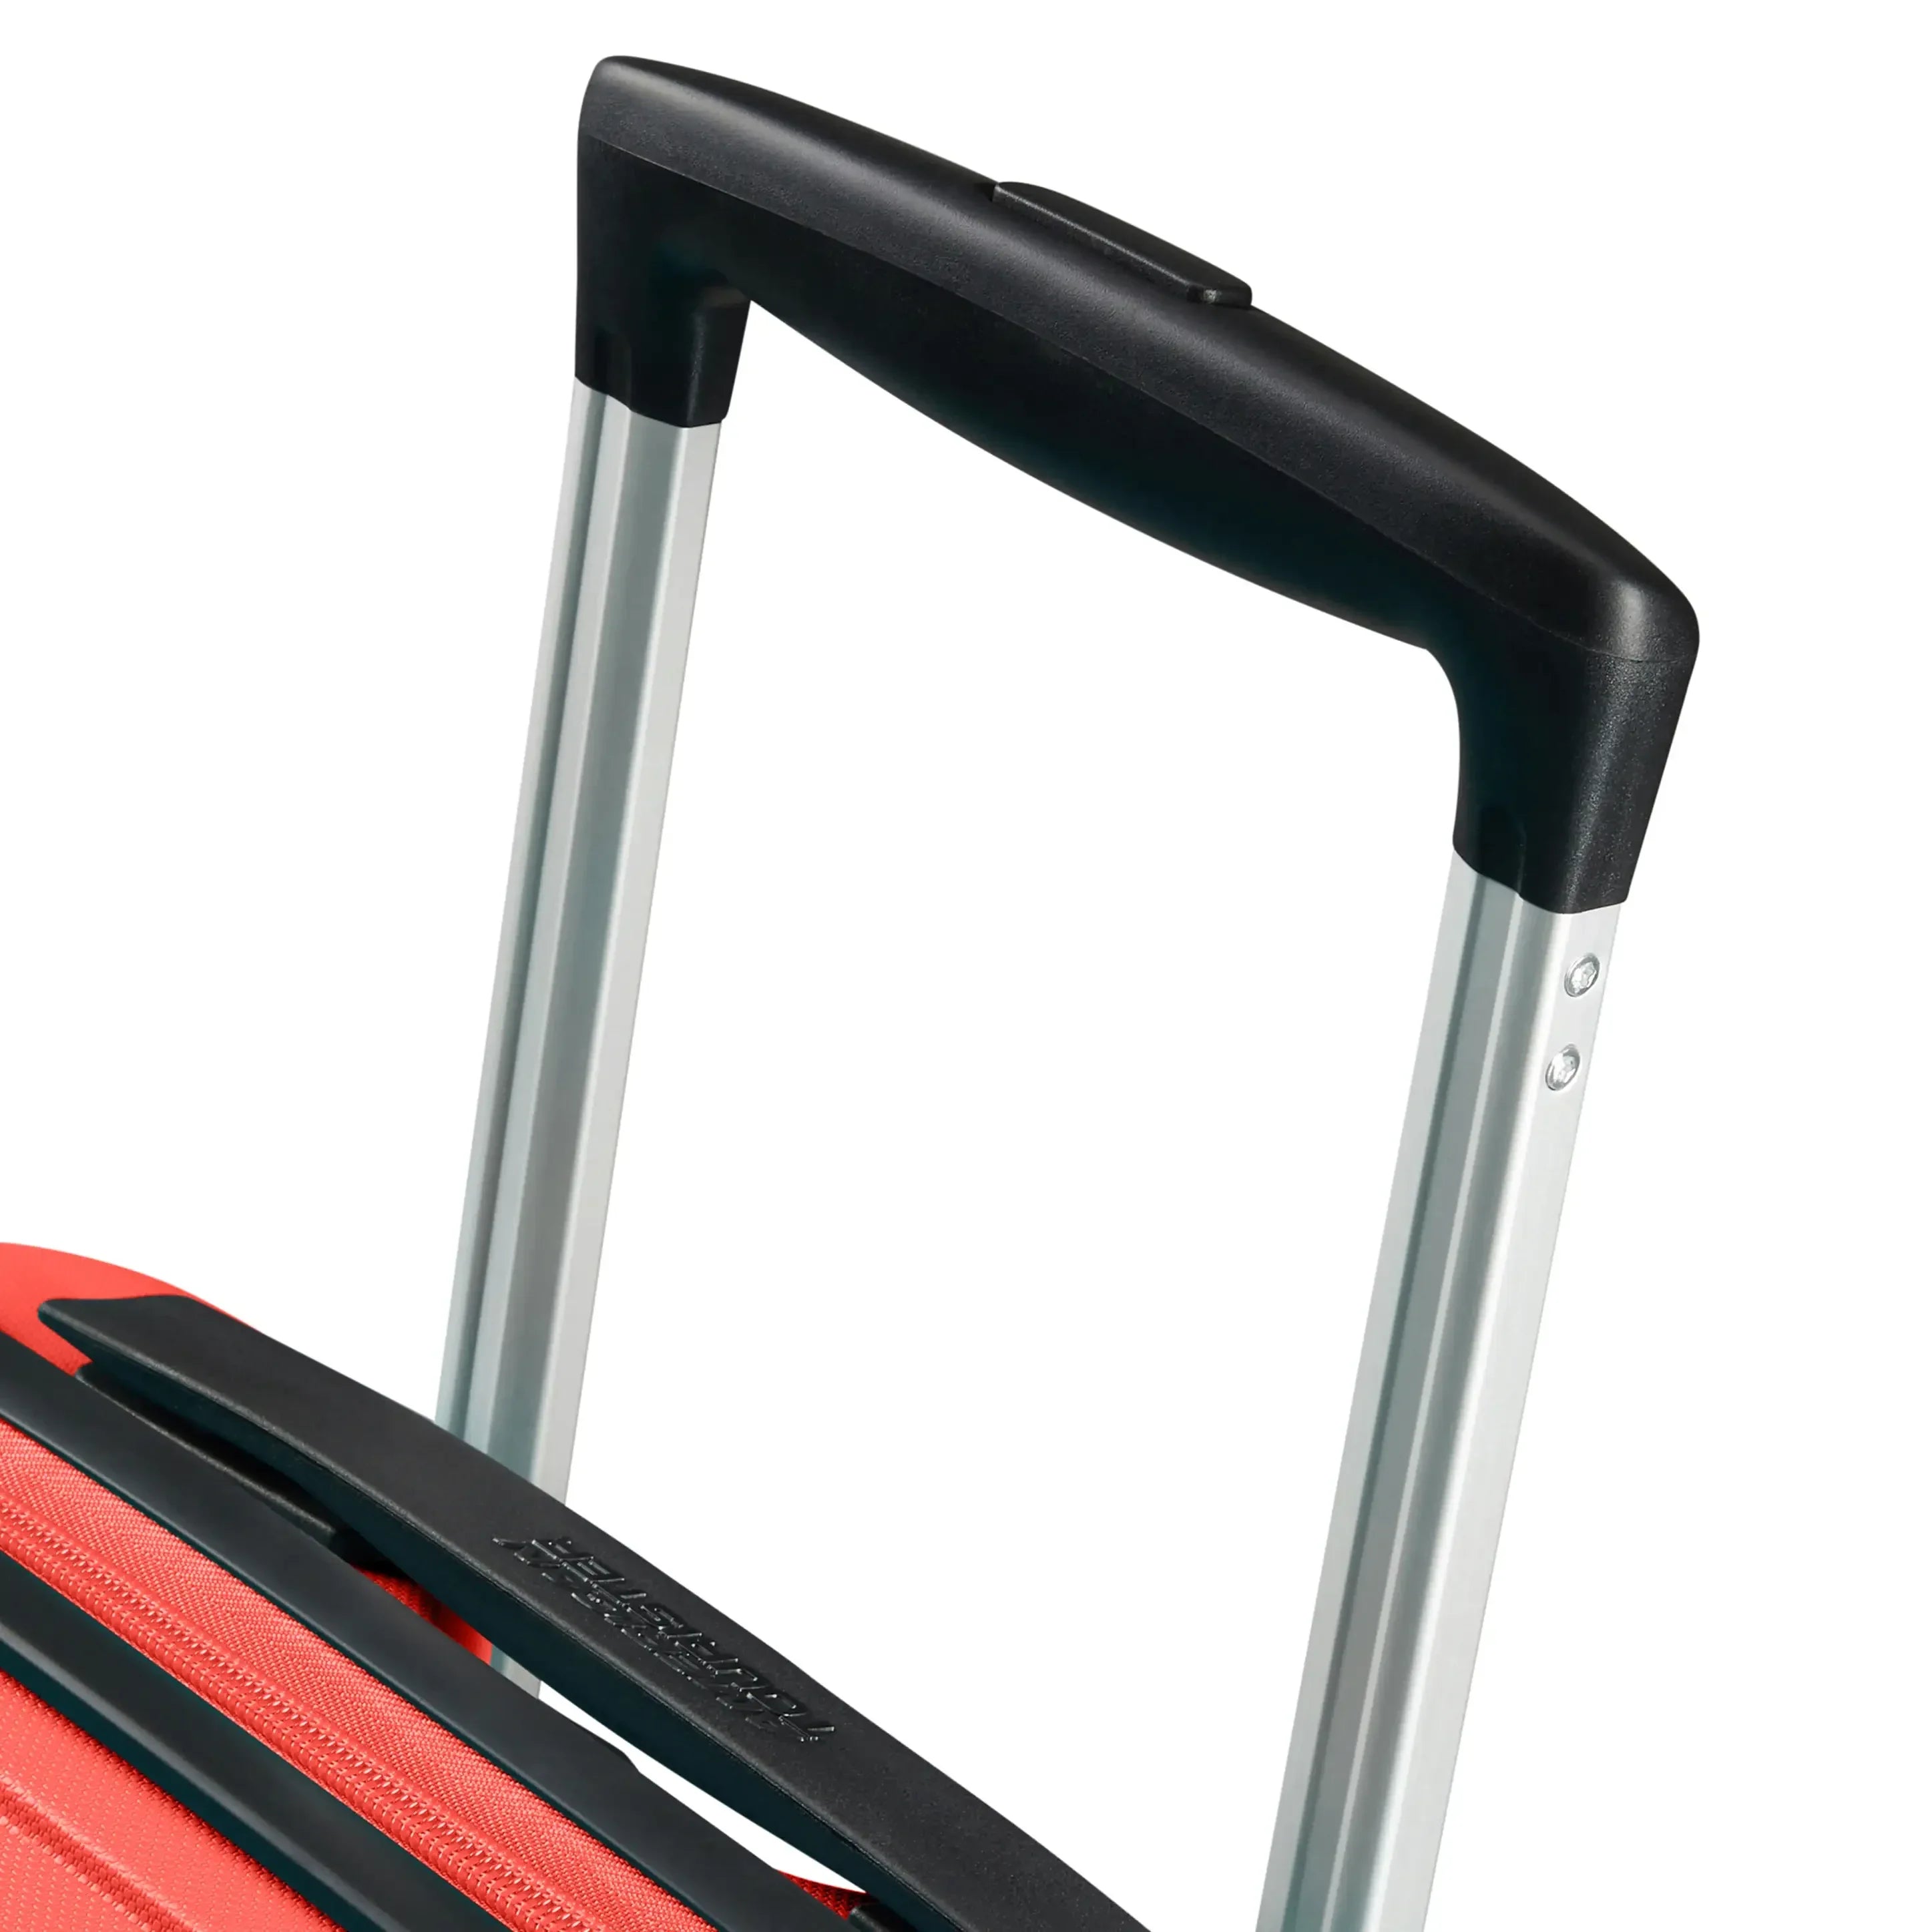 American Tourister Bon Air DLX Spinner trolley 4 roues 55 cm - rouge magma